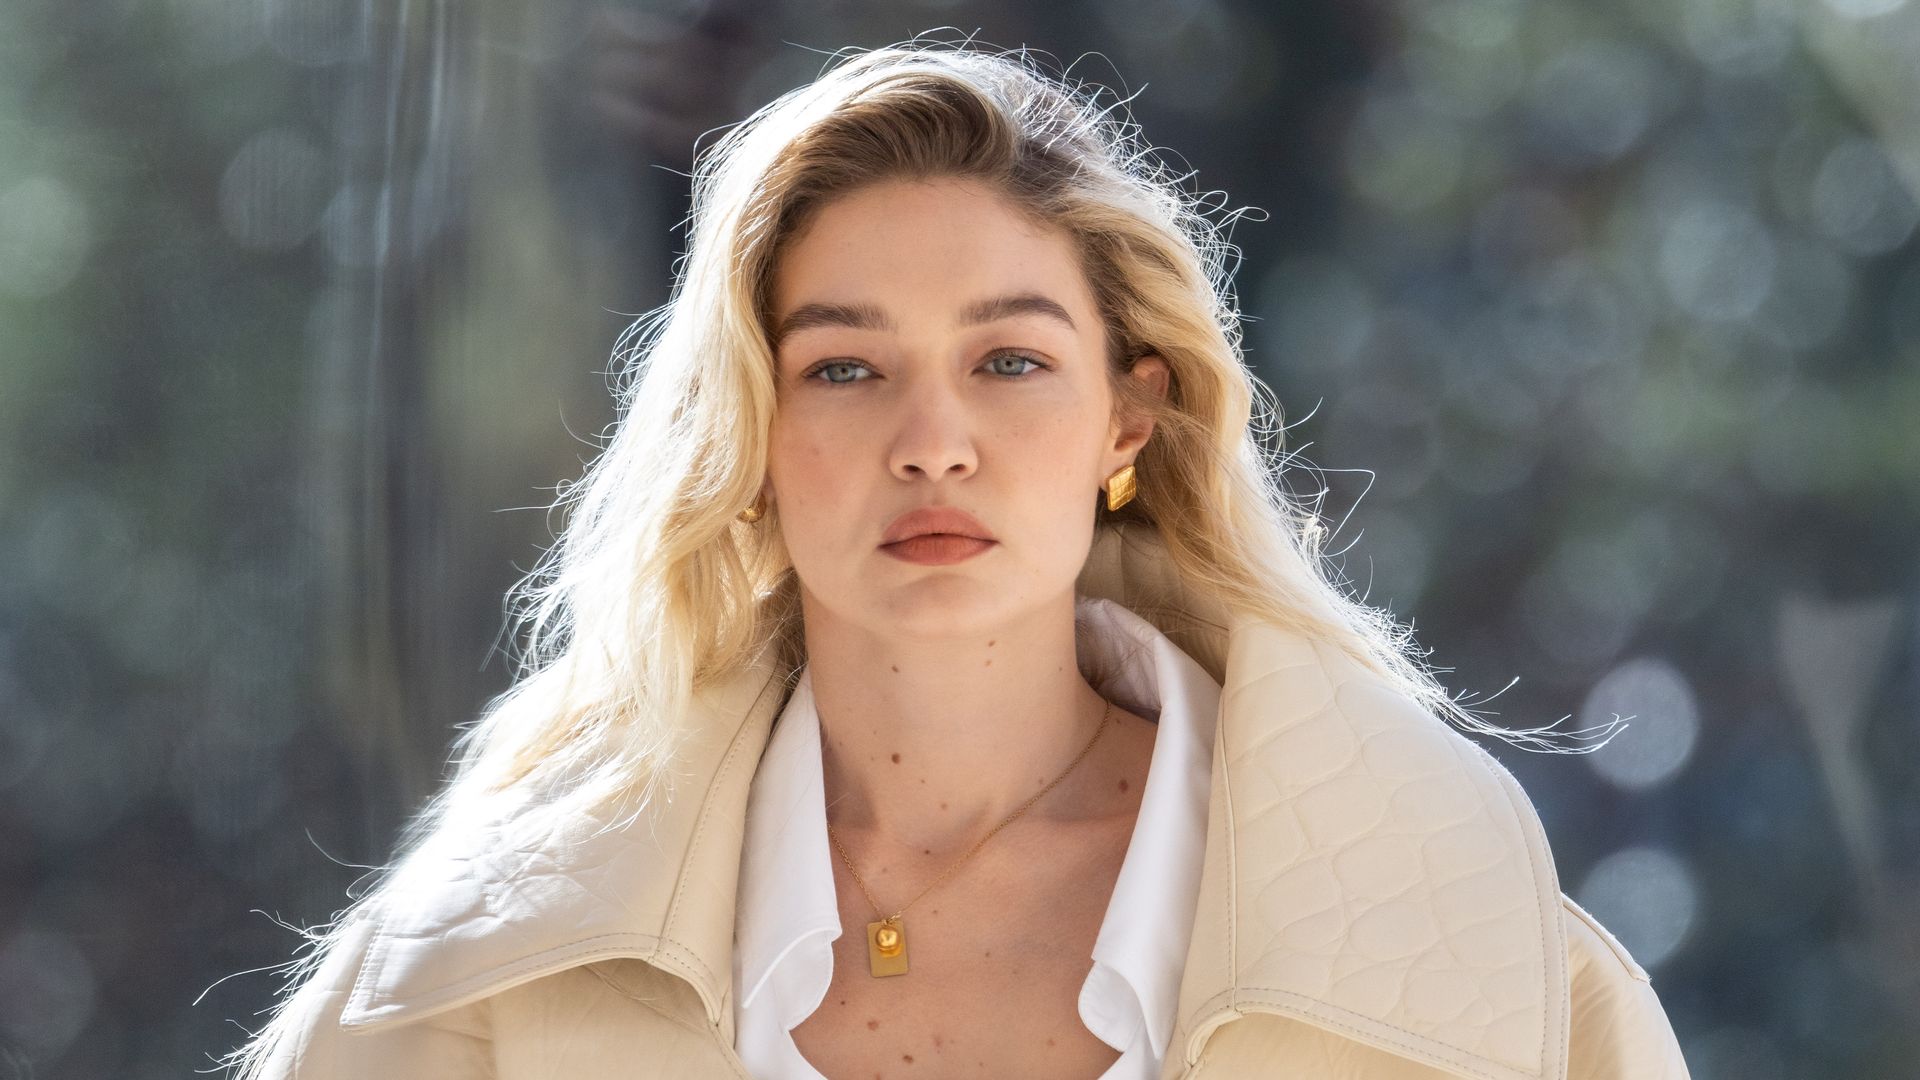 Gigi Hadid Says She's 'Glad To Be a Young Mom' To Daughter, Khai